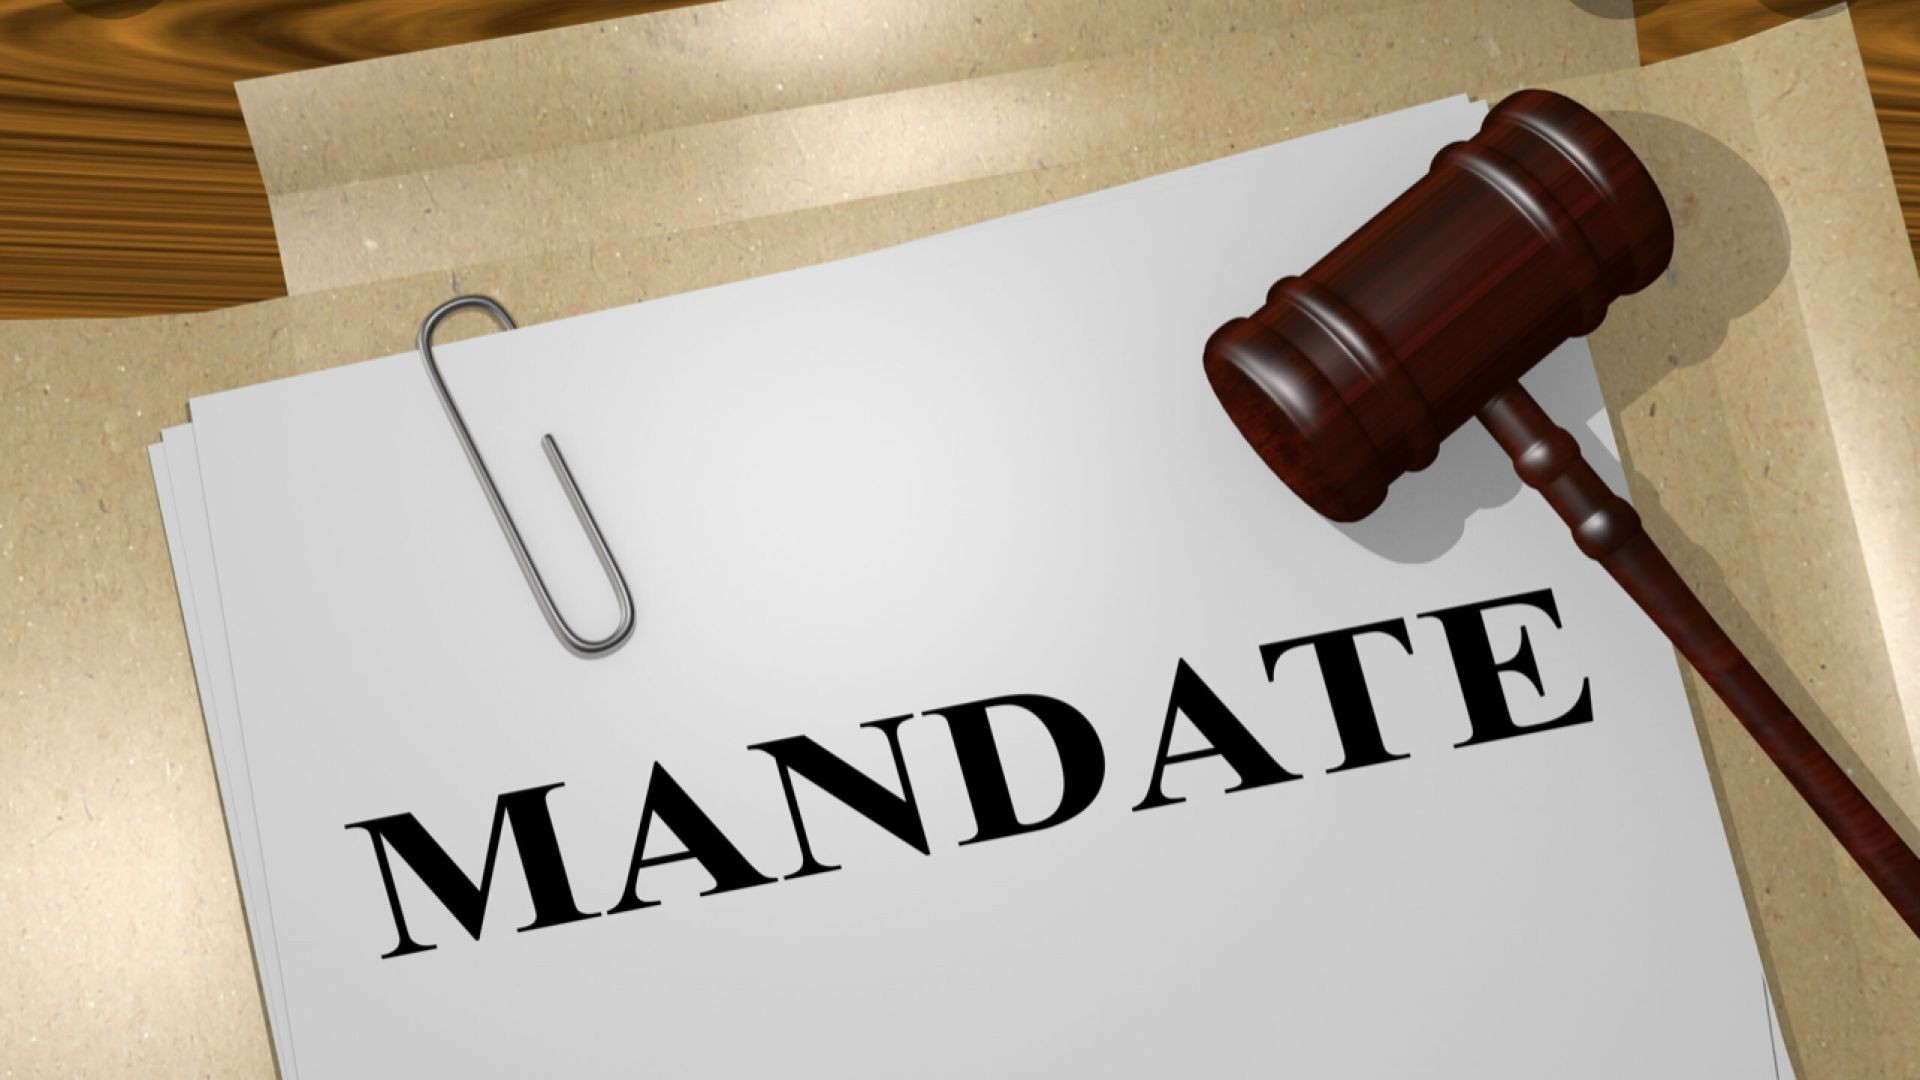 â�£DID YOU KNOW-Mandates are NOT Laws